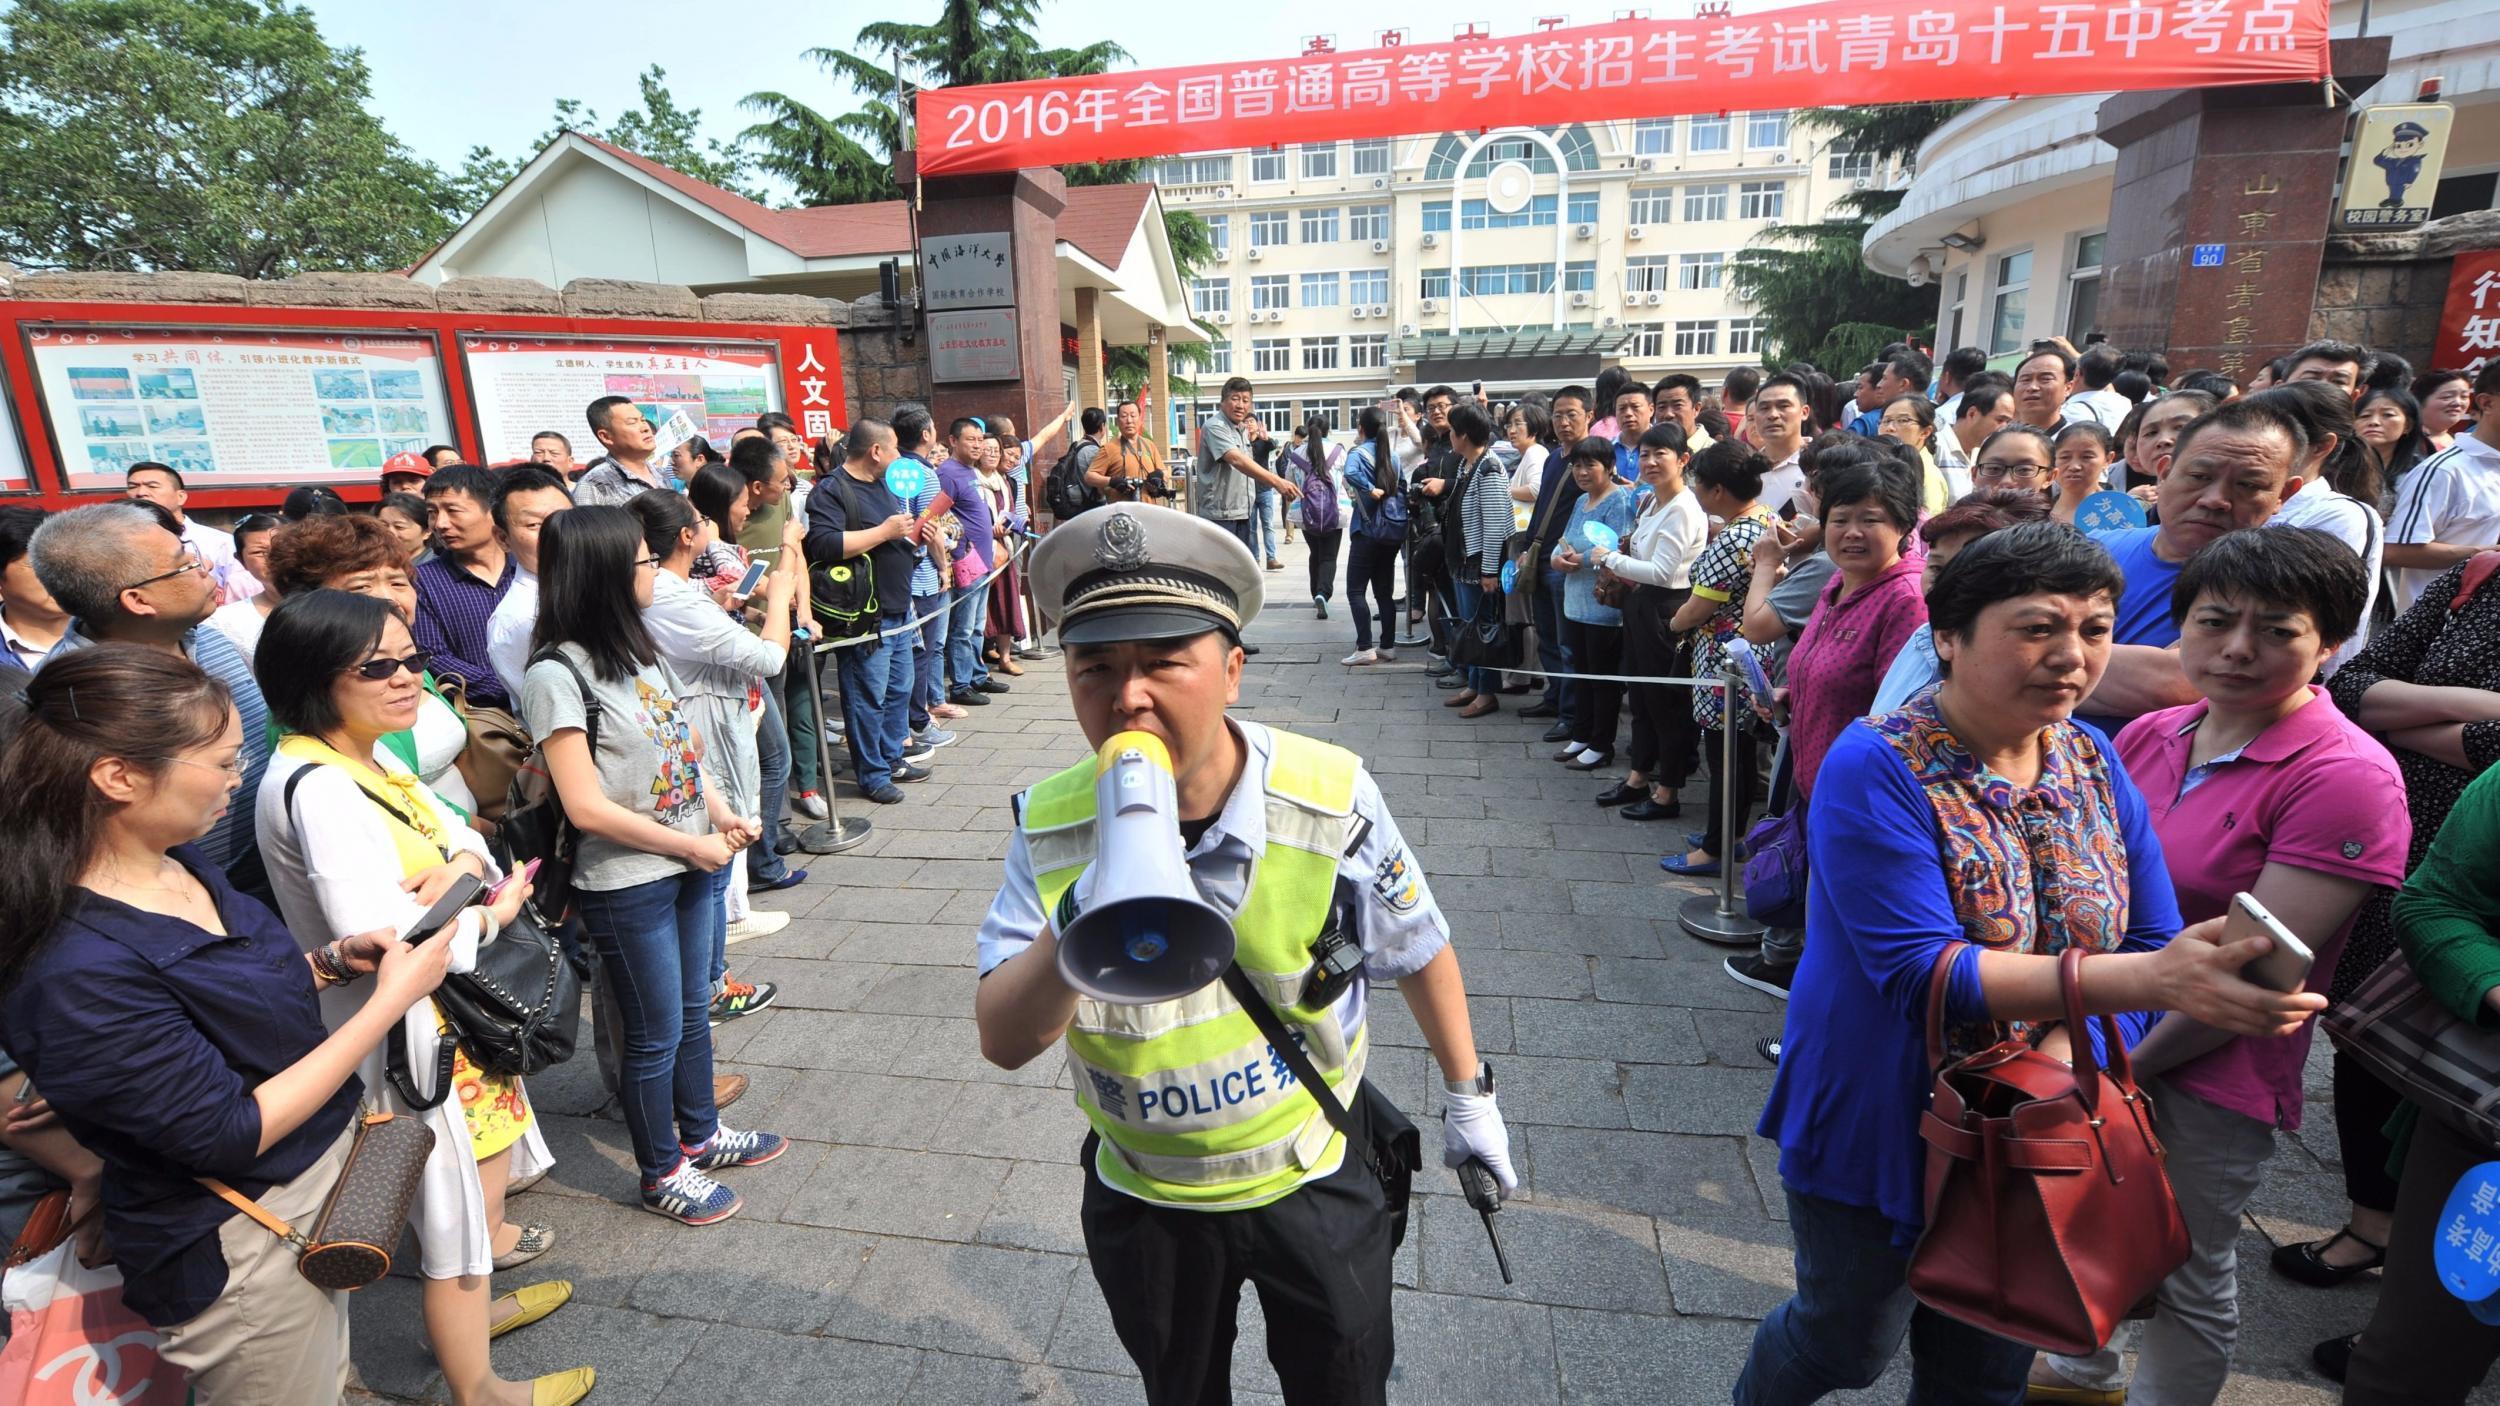 A policeman clears a path for students outside a university gaokao entrance exam in Qingdao, in China’s Shandong province this week